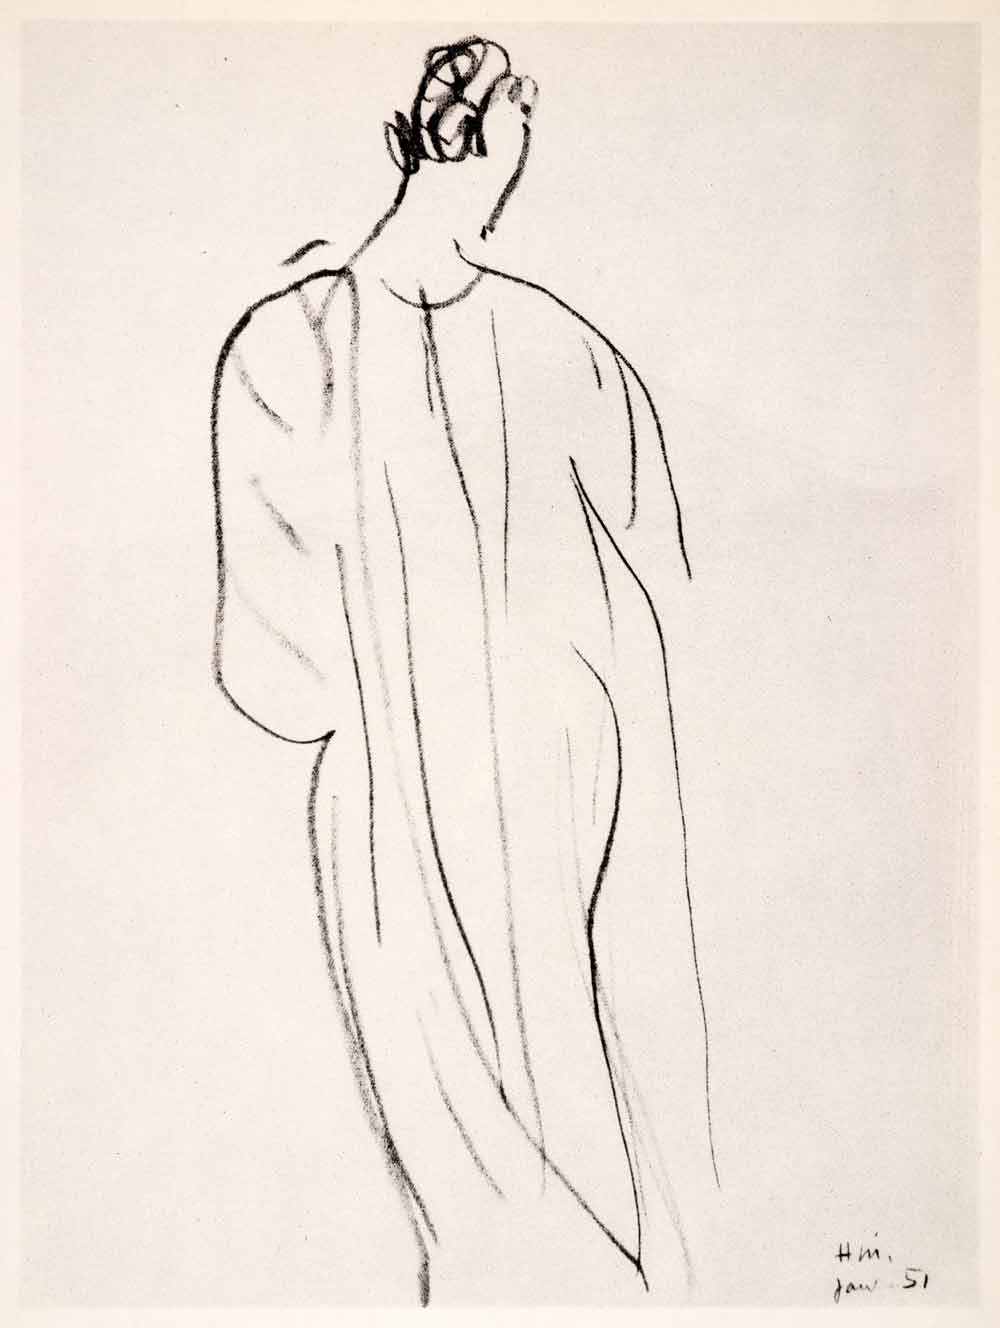 1969 Photolithograph Matisse Art Nude Woman Back Sheer Nightdress Pencil Sketch